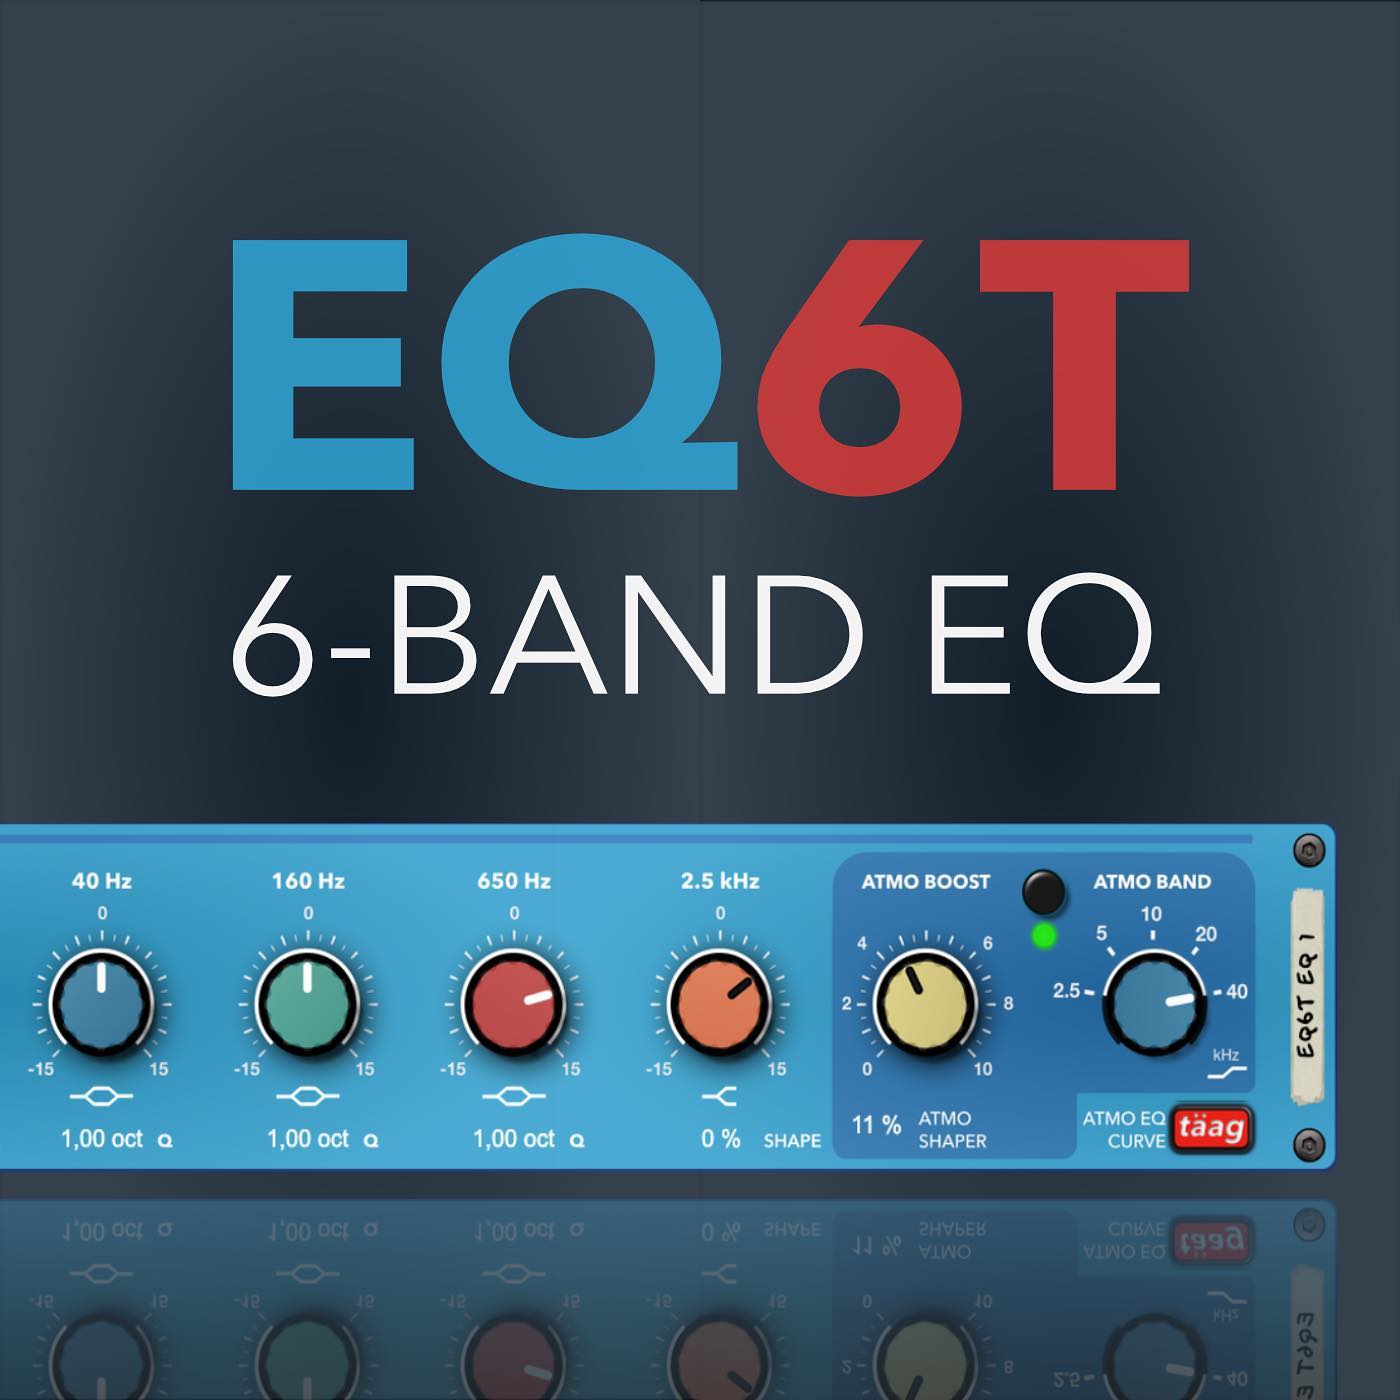 EQ6T (6-band EQ) Update  v. 1.1.0 is released & include:

- New “TAAG mode”: The emualtion of the original hardware device. Switching between EQ curve modes. 
By default, works as High-Shelf band with own EQ curve characteristics (EQ6T). 
If TAAG EQ Curve is on, ATMO band emualte “Air-band” (TM) EQ curve of the hardware device.

Now “Atmo band Frequency” set the shelf boost frequency. 
- By default, shelf-boost works at 2.5 kHz, 5 kHz, 10 kHz, 15 kHz or 16 kHz. 
- If TAAG EQ Curve is on, shelf-boost works as hardware device at 2.5 kHz, 5 kHz, 10 kHz, 20 khz, 40 kHz.

“BOOST TWICE”: Increasing Atmo Band Boost range from 0..+10 dB, to 0..+20 dB. 
Not avaliable at TAAG EQ curve mode

#turn2on #eq6t #equaliser #maag #reason #rackextension #plugin #audio #airband #taag #reasonstudios @reasonstudios